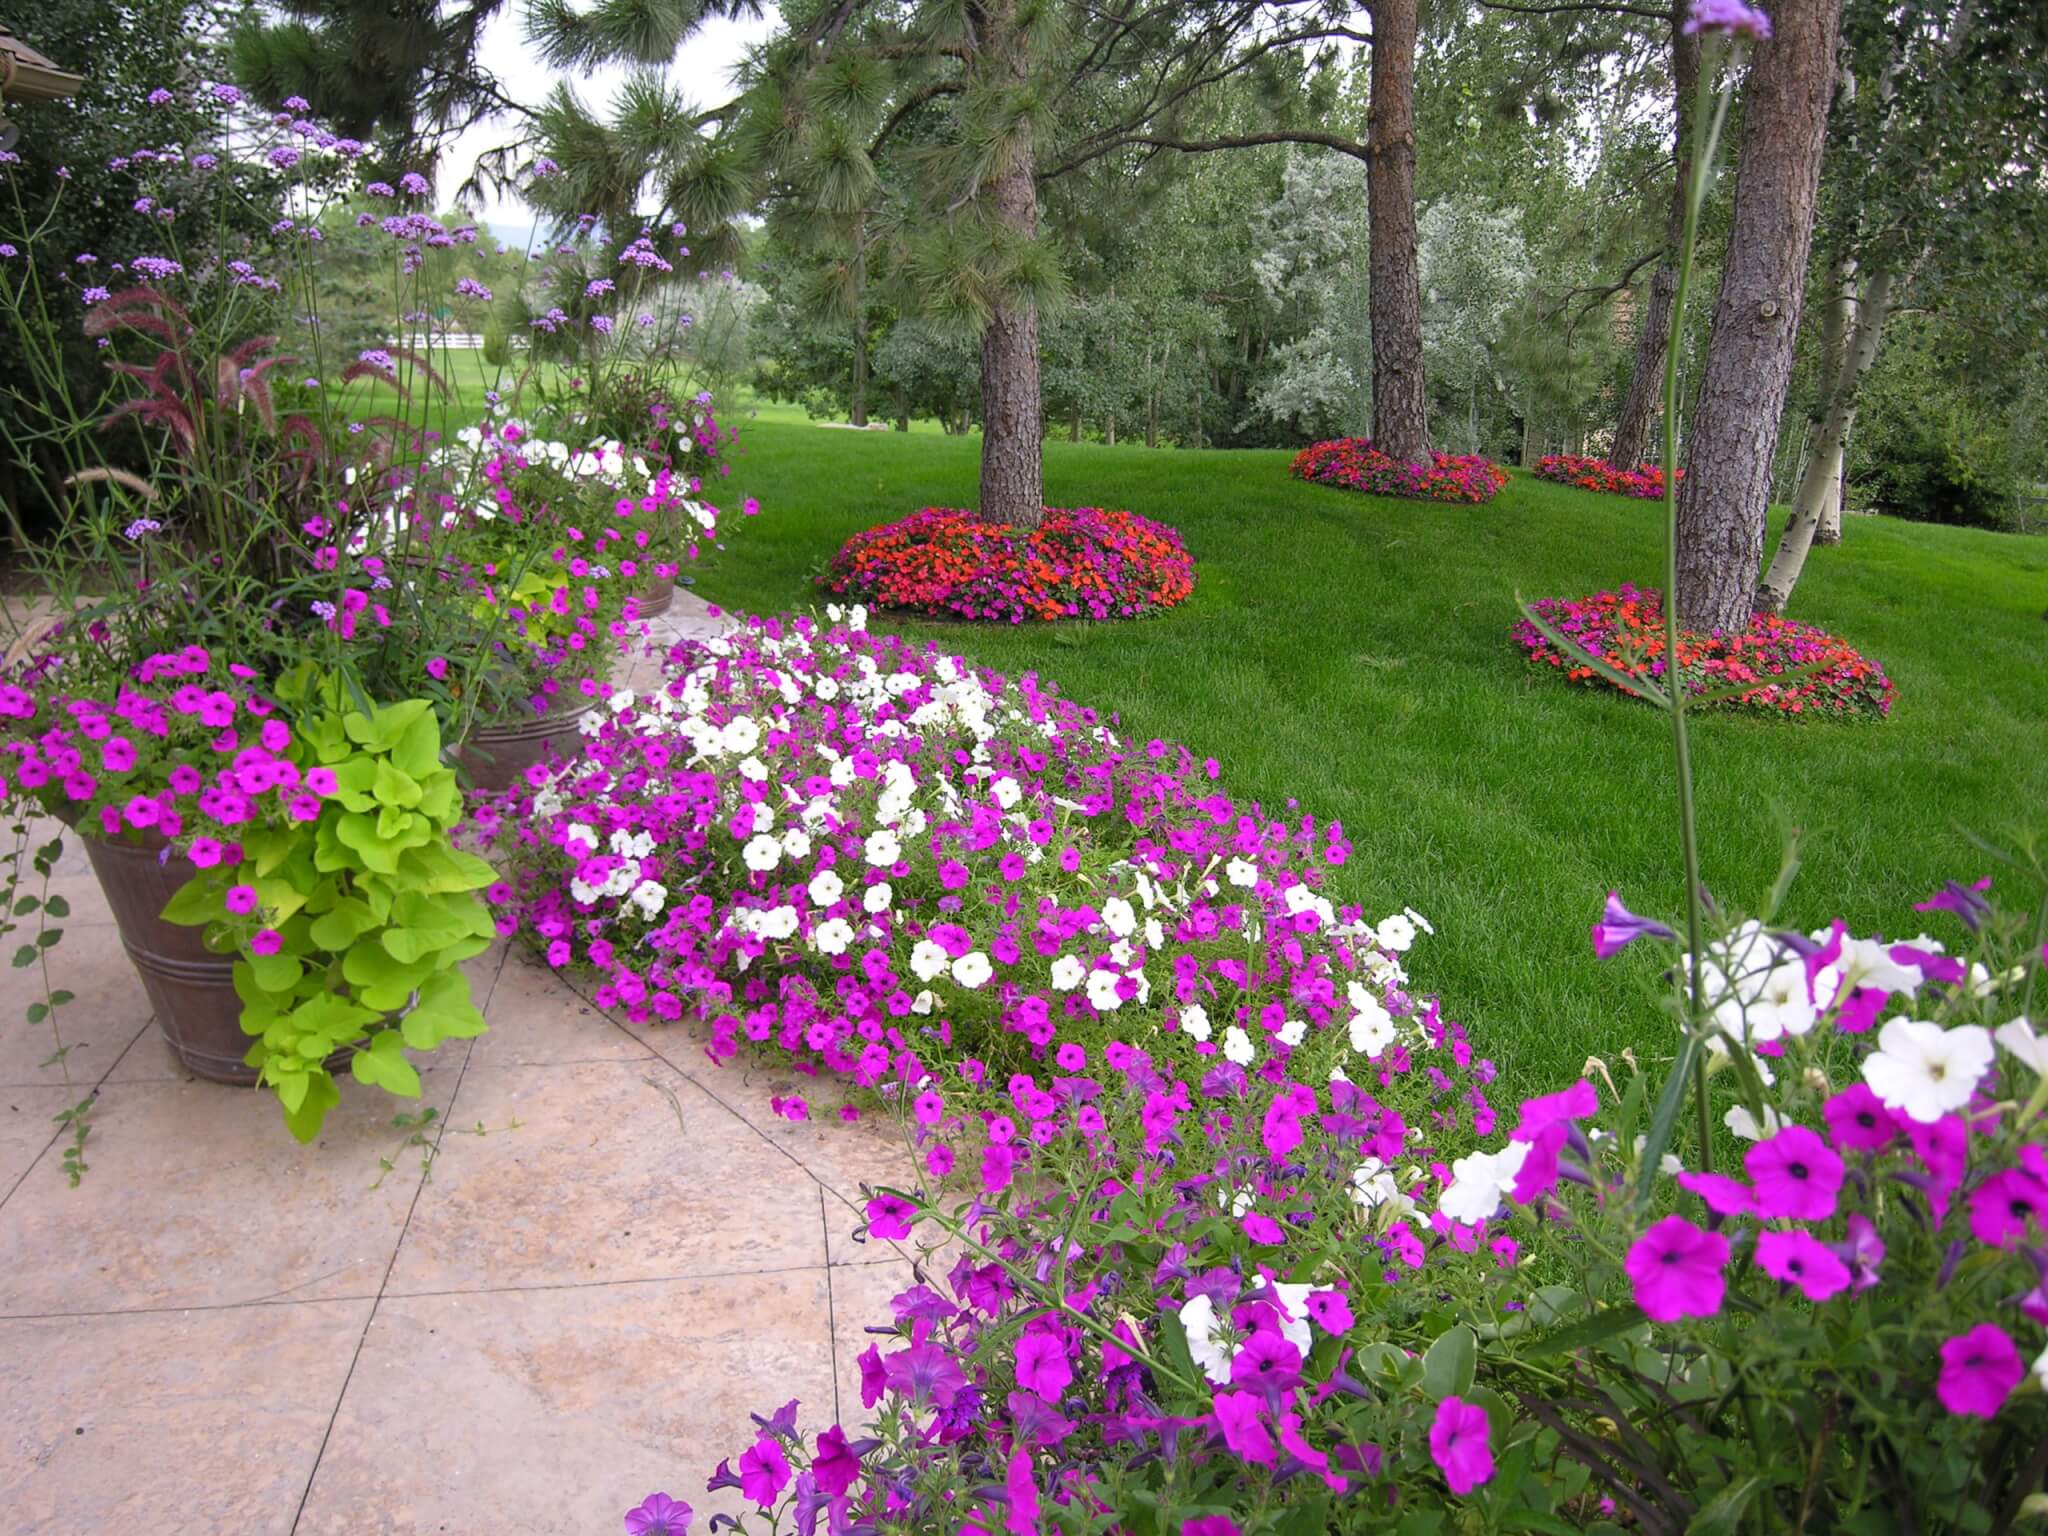 The garden is filled with trees, colourful flower plants, flower pots and plants